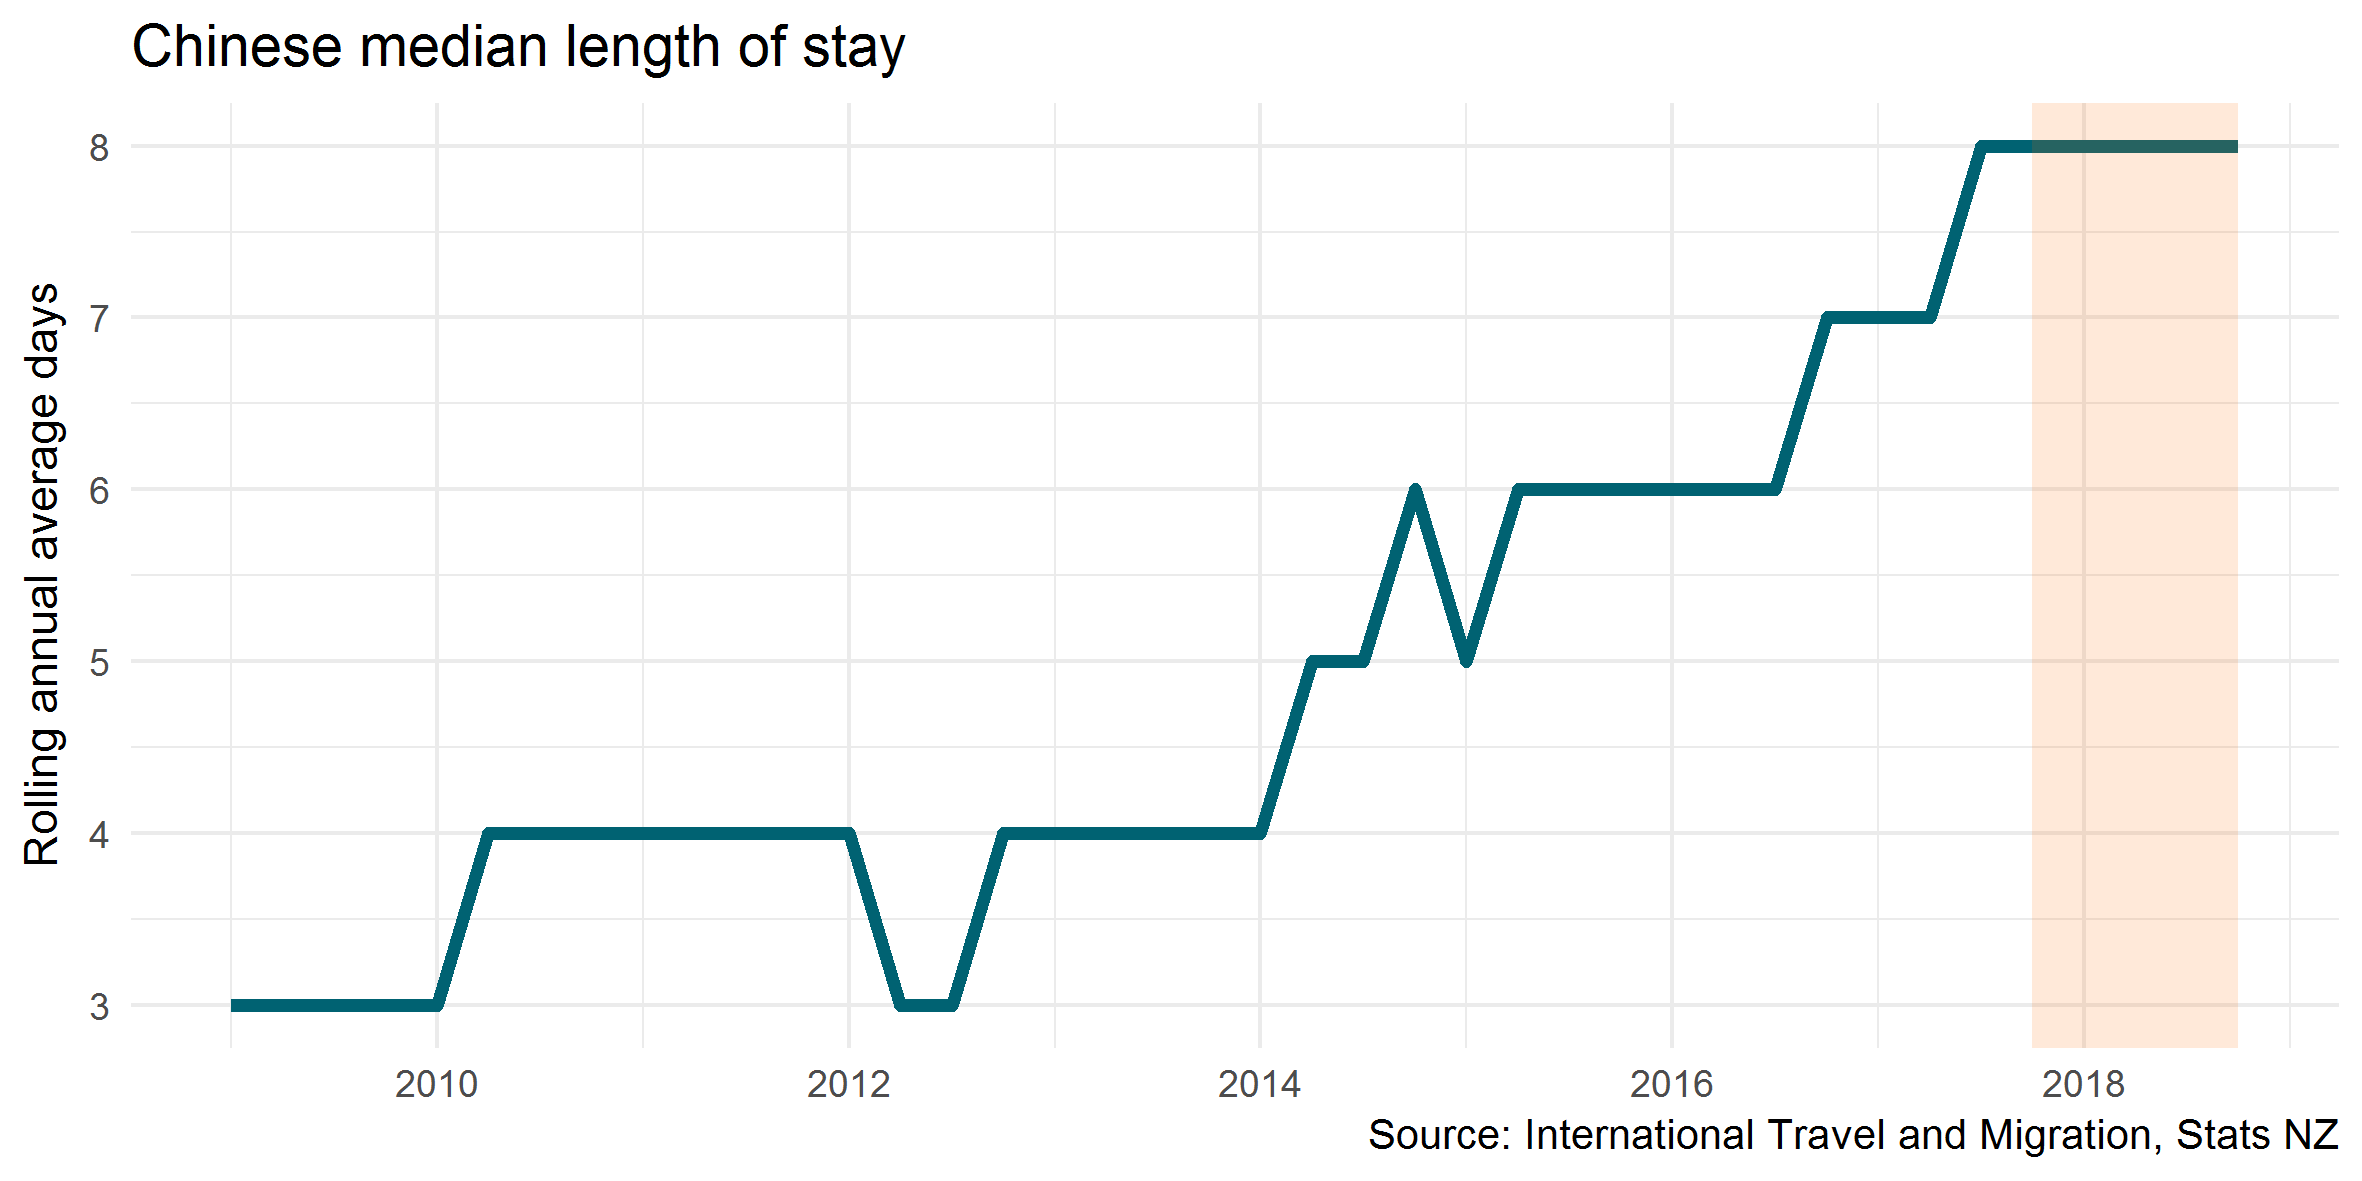 Chinese median length of stay